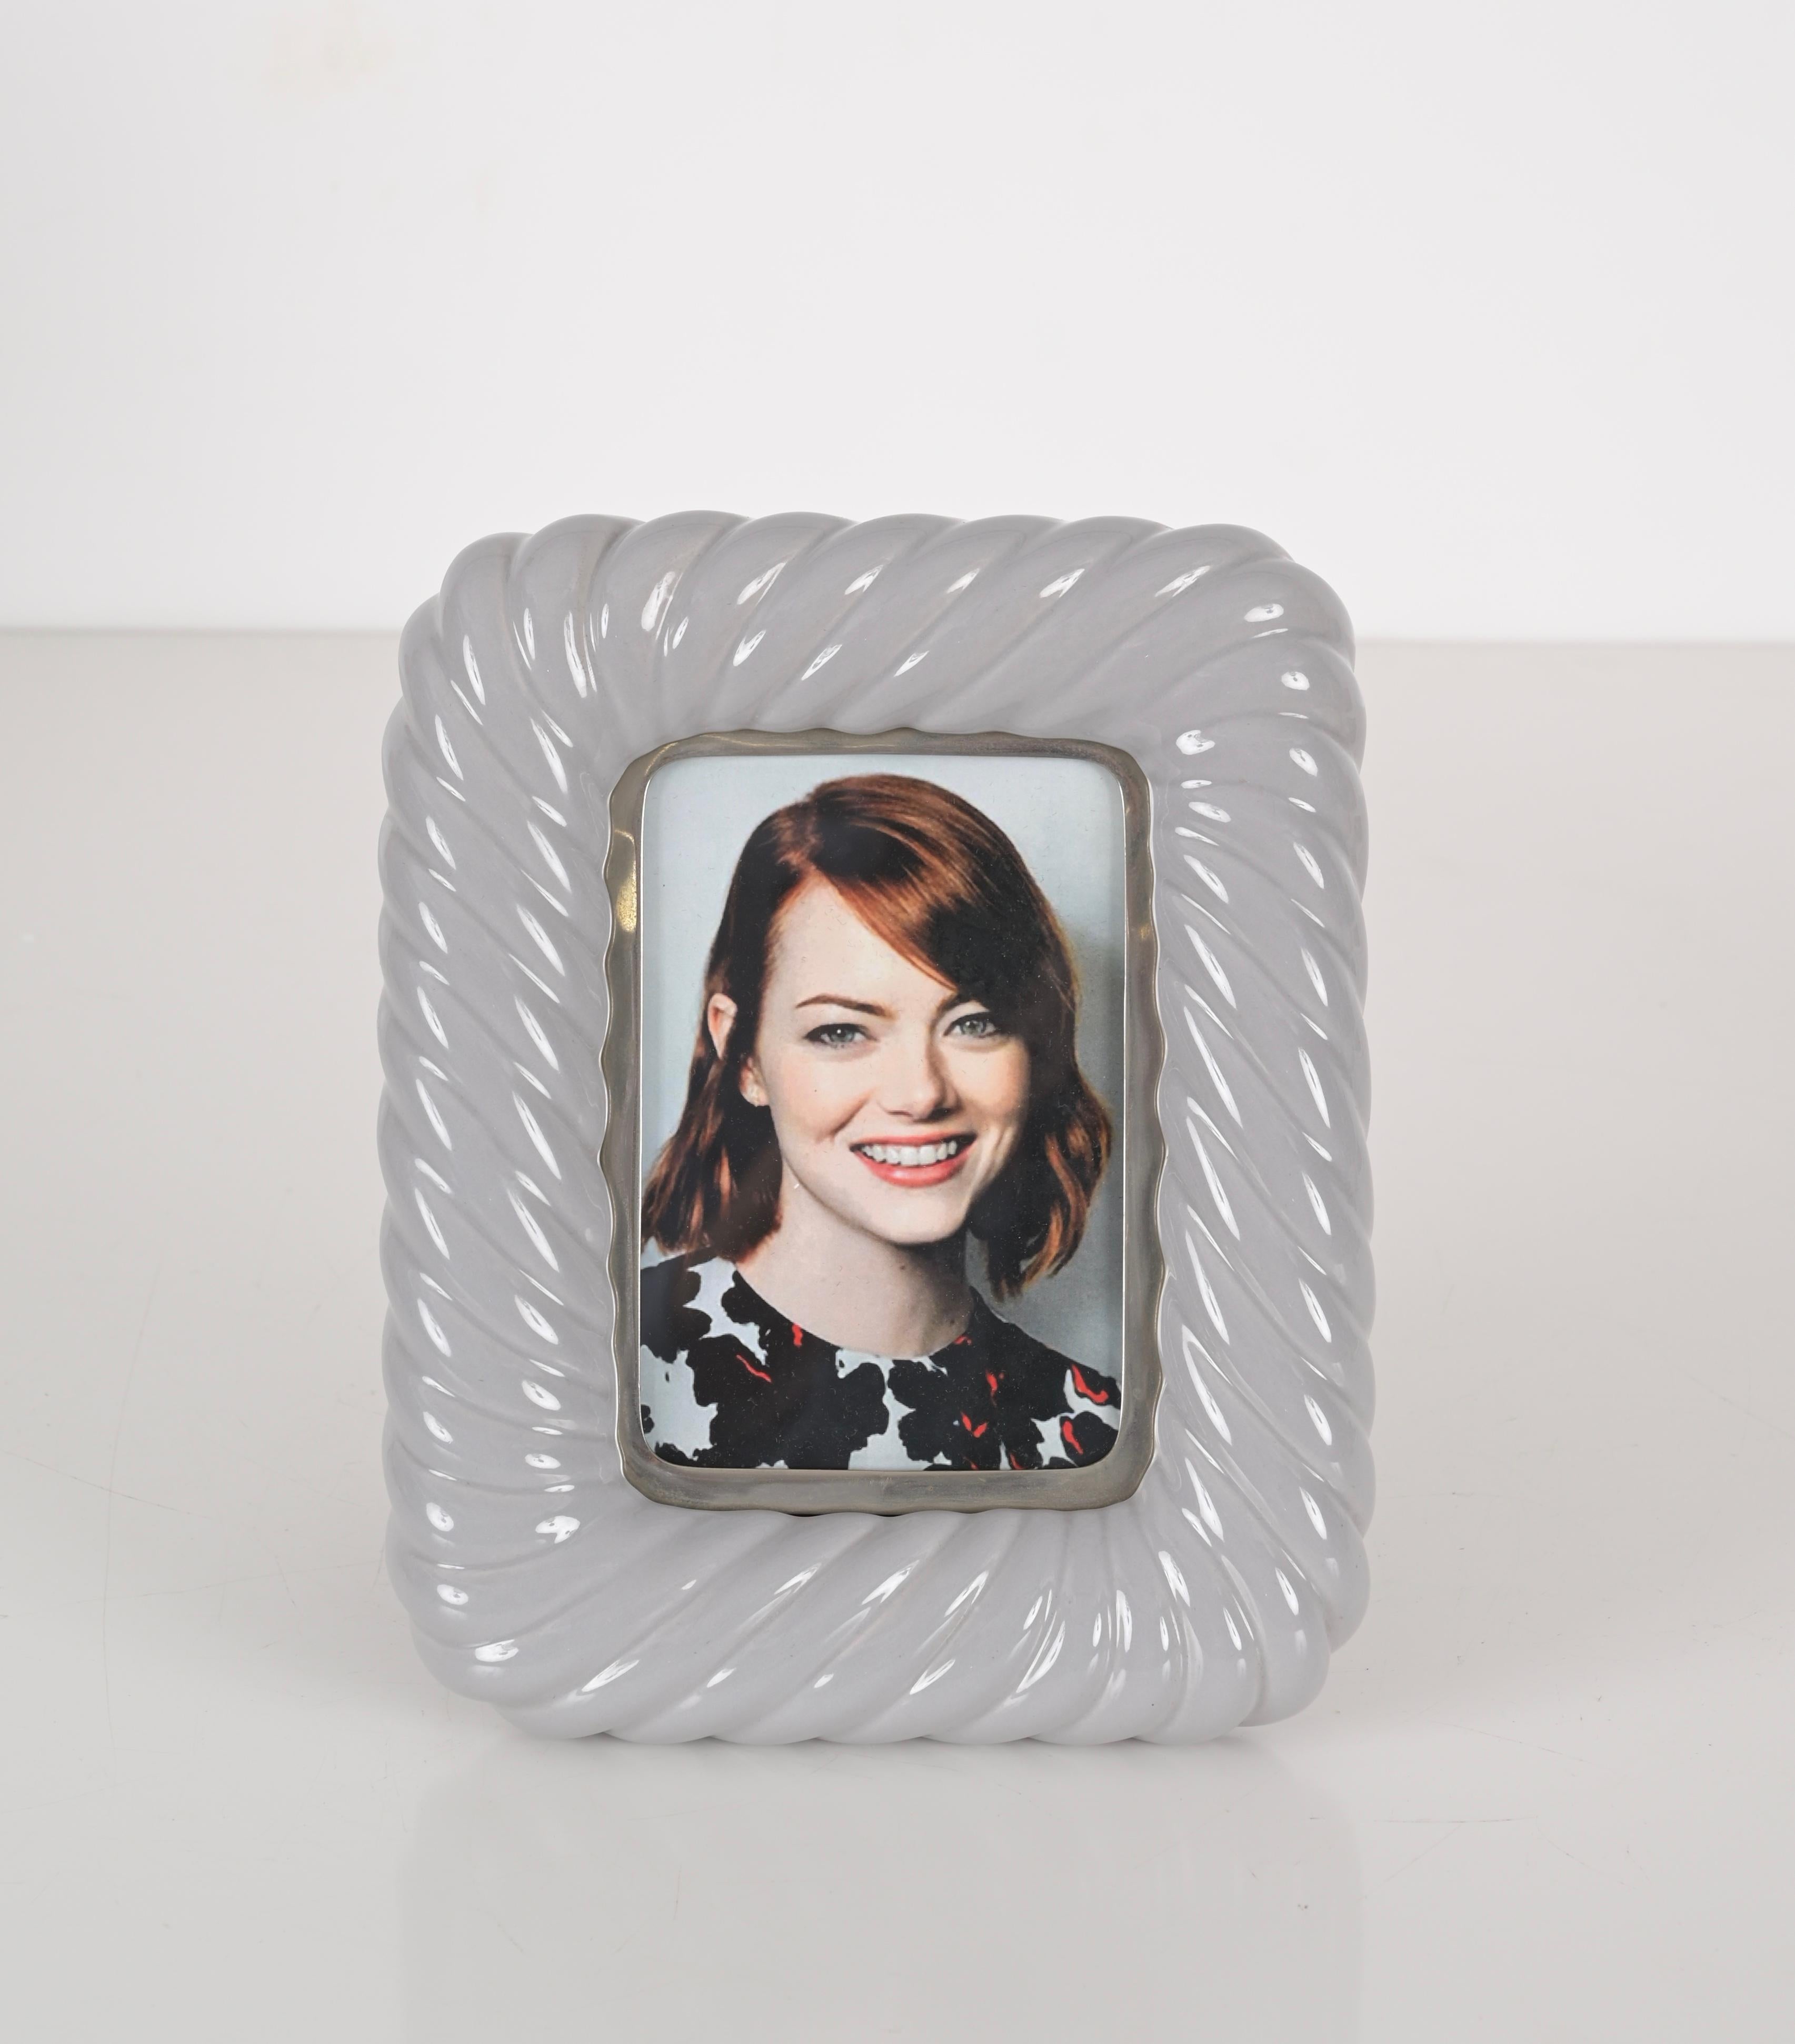 Gorgeous Mid-Century Tommaso Barbi picture frame in a rare grey ceramic and chrome version. This iconic object was designed in Italy during the 1970s by Tommaso Barbi, and is signed on the back.

This piece is unique for the fine craftsmanship on